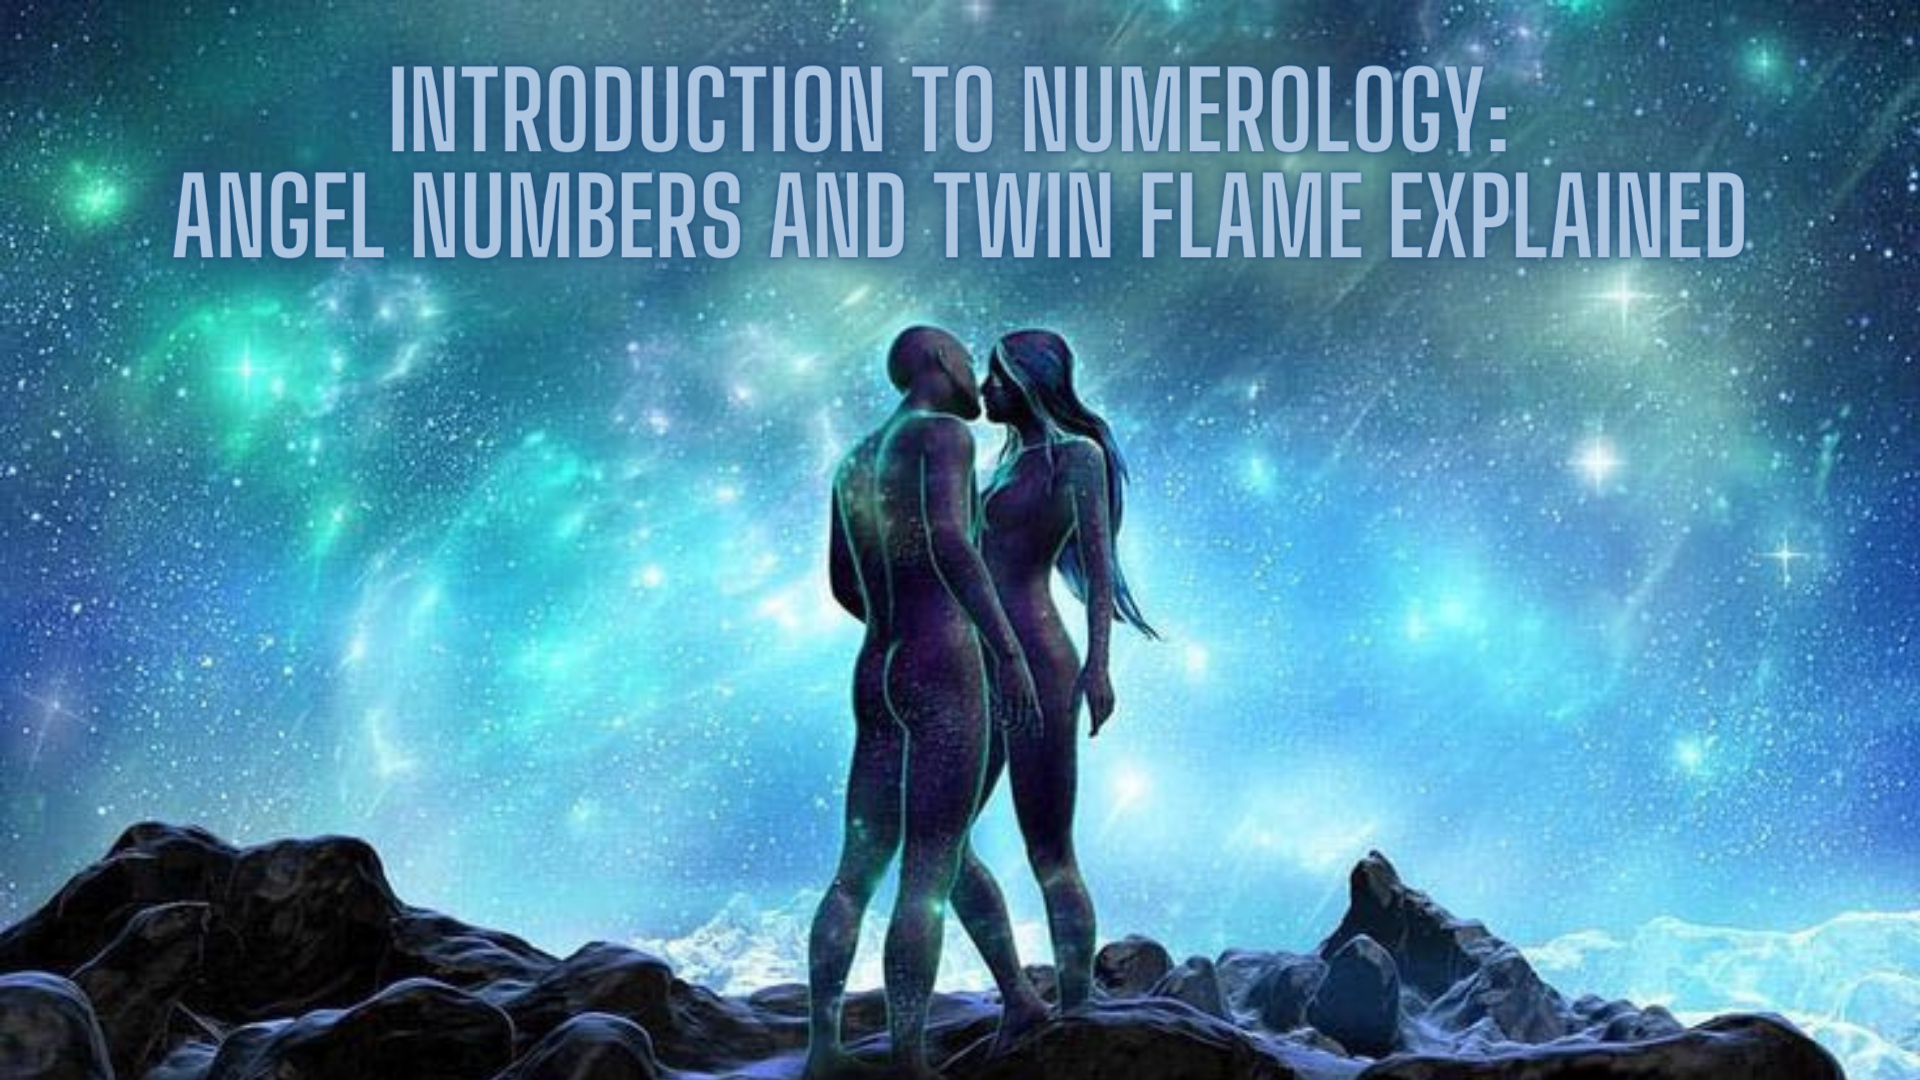 A man and woman standing and kissing with words Introduction To Numerology: Angel Numbers And Twin Flame Explained